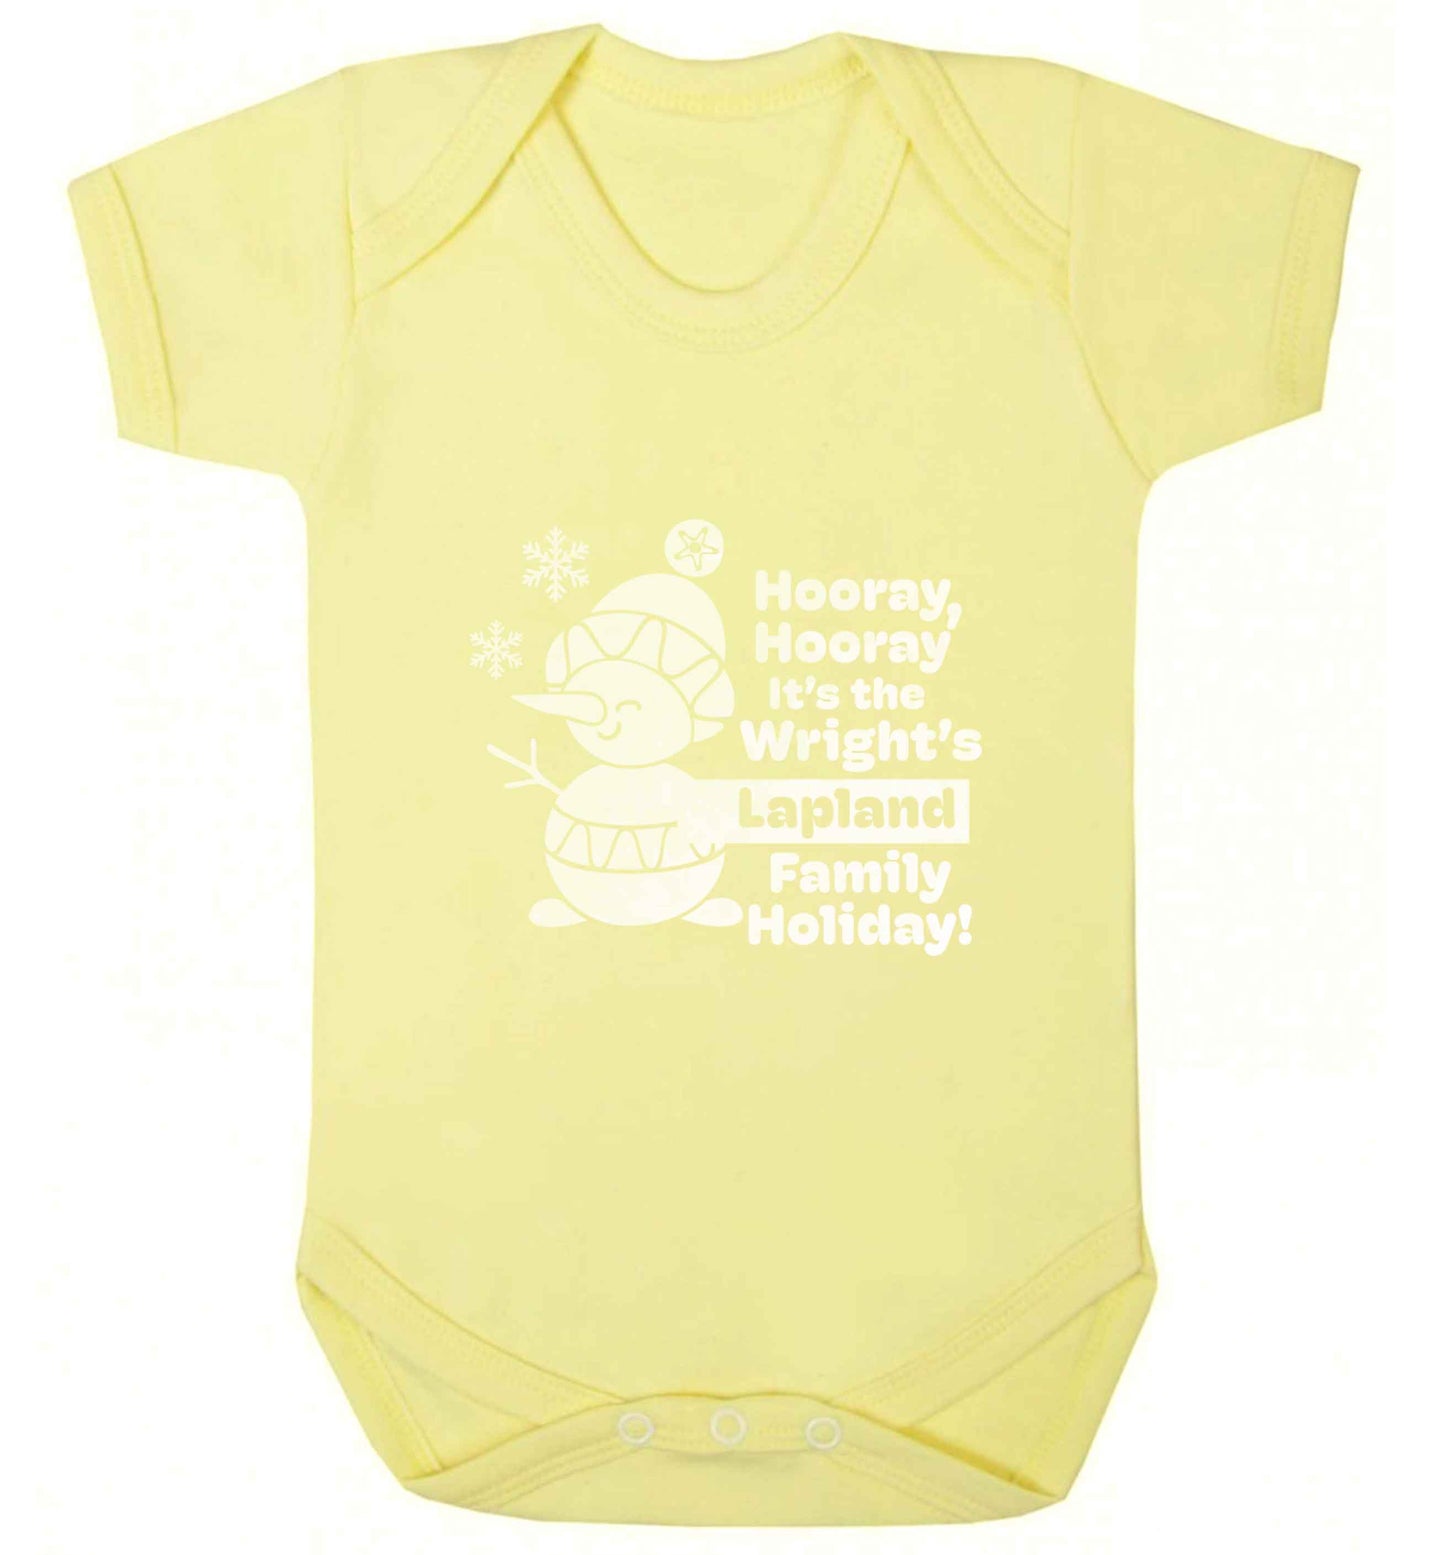 Hooray it's the personalised Lapland holiday! baby vest pale yellow 18-24 months